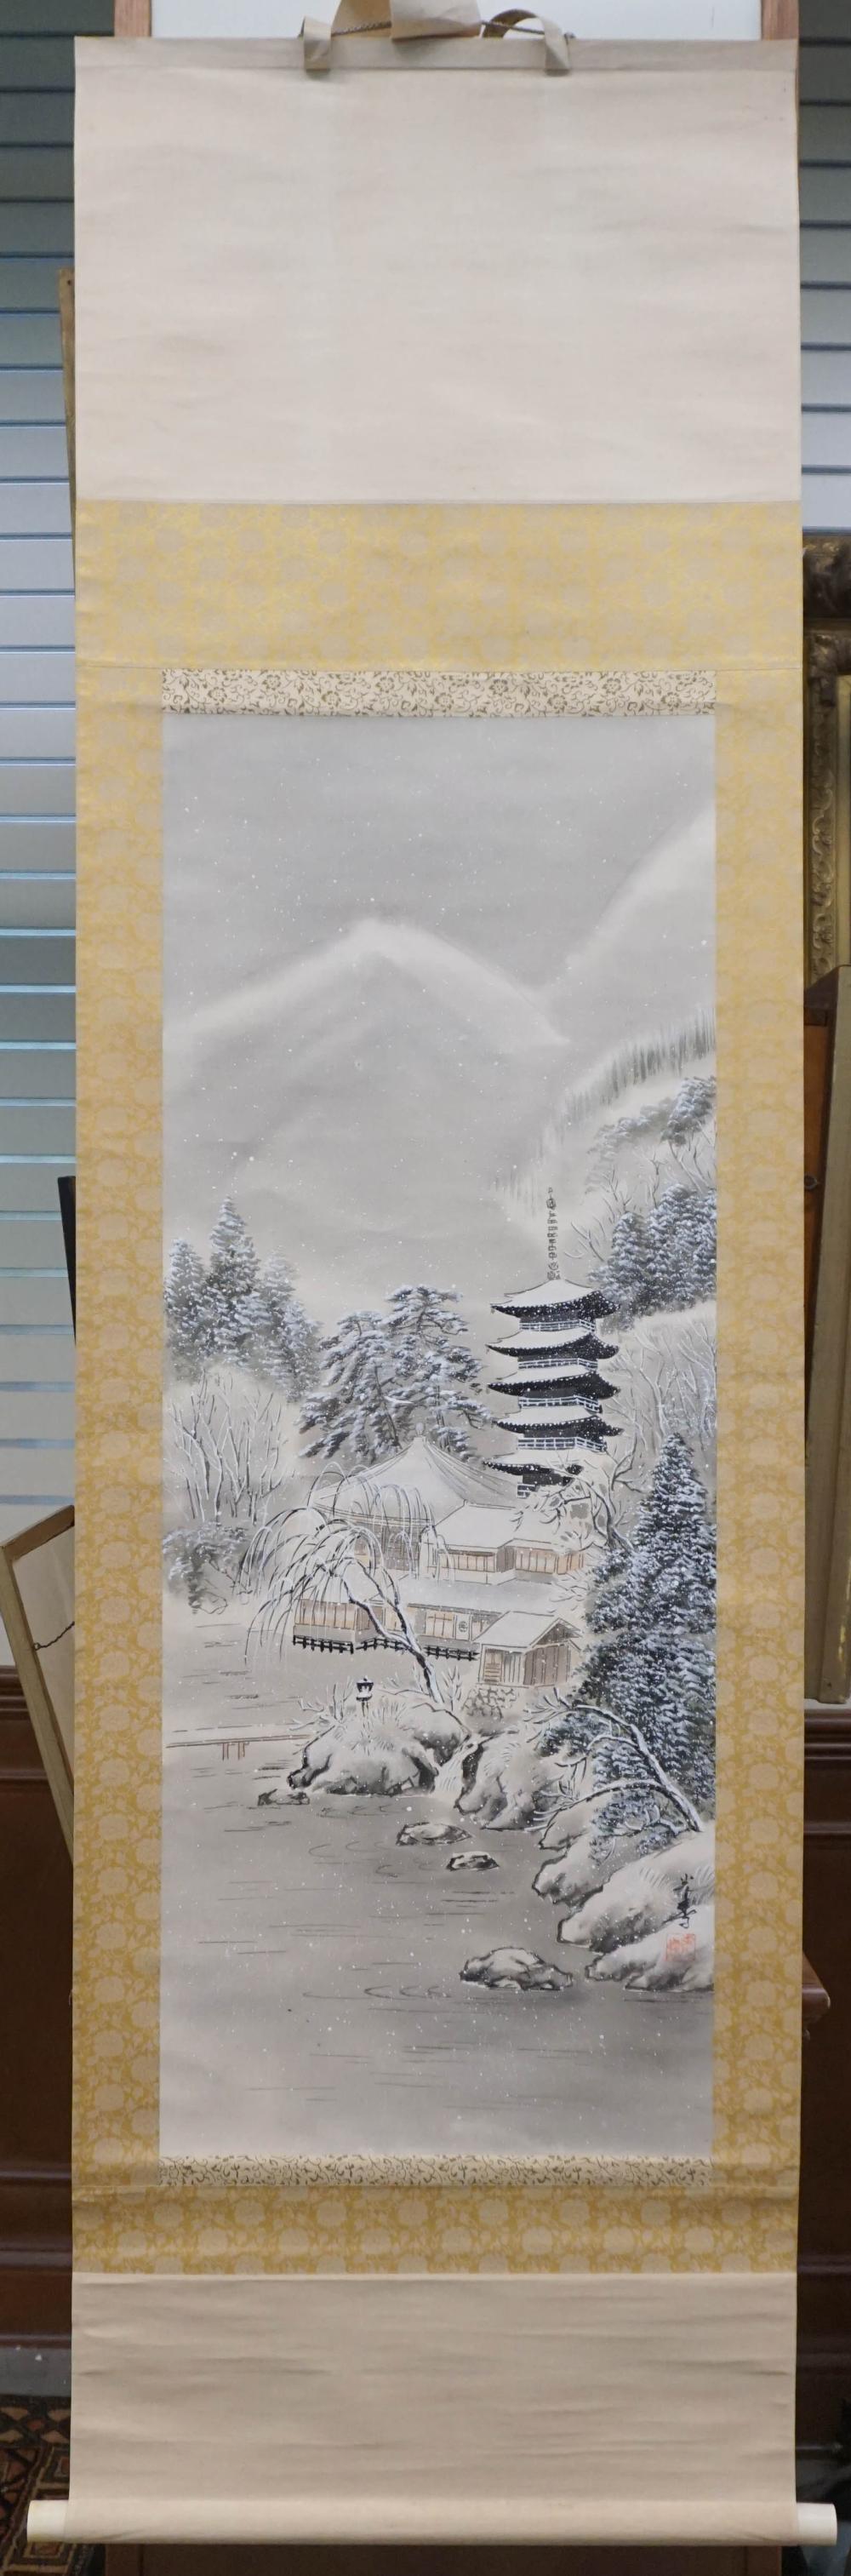 CHINESE HANGING SCROLL WINTER 2e6fbe